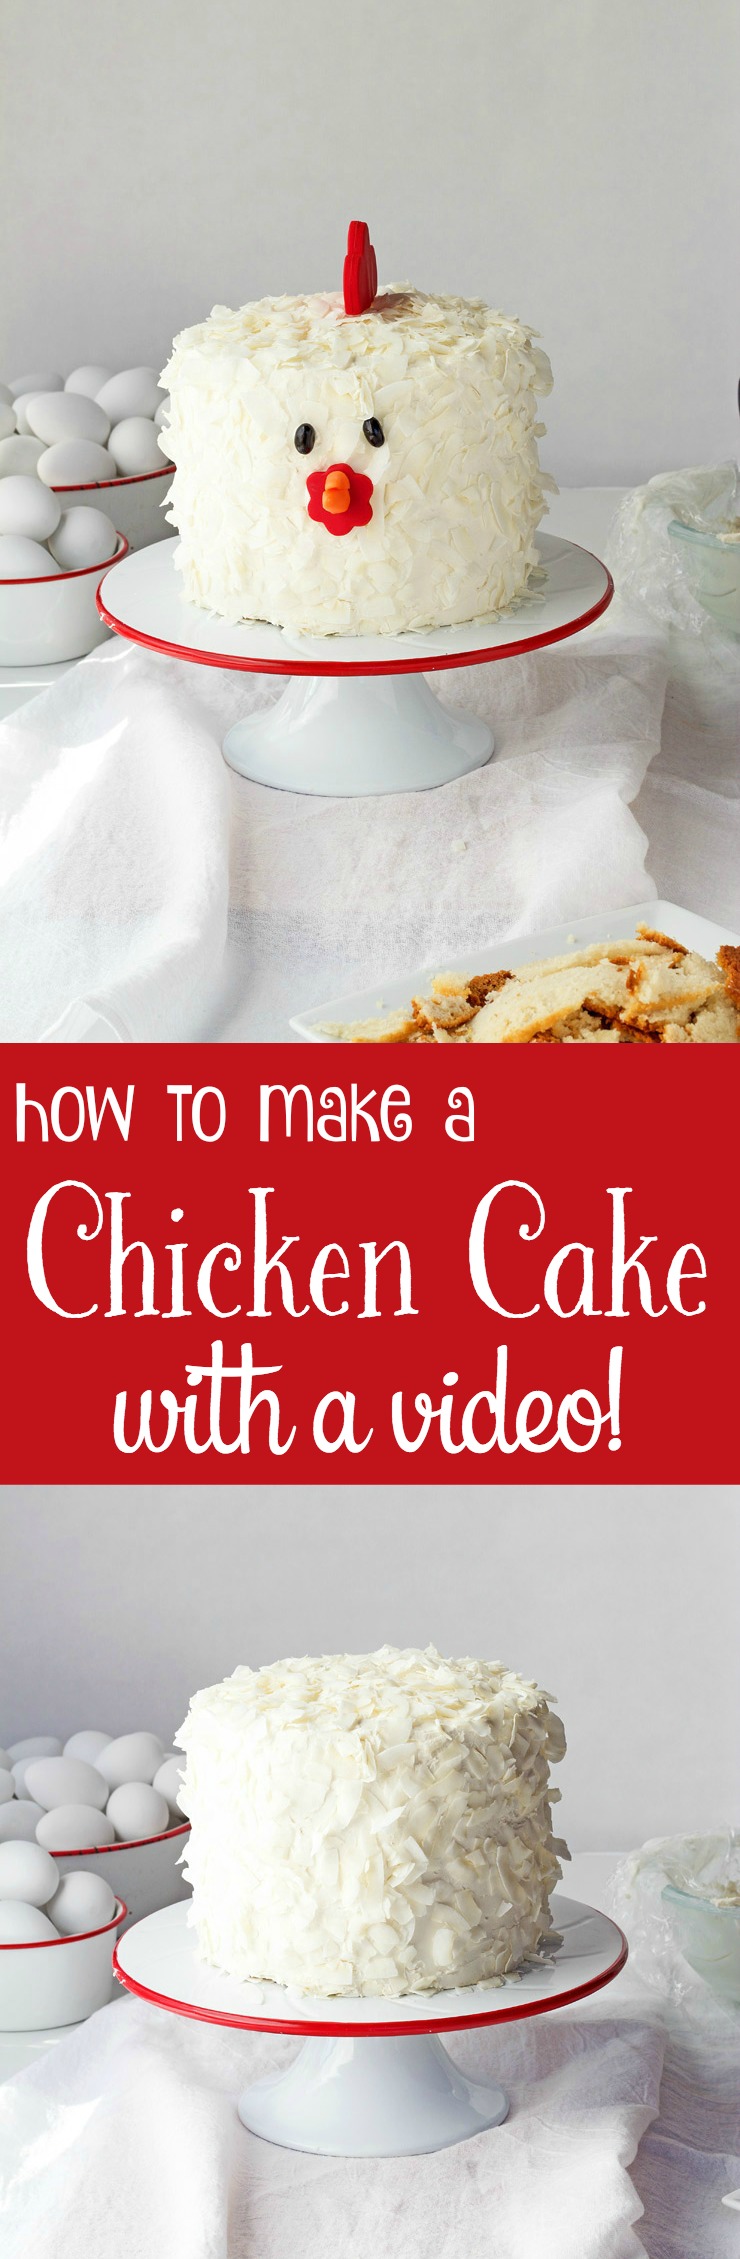 How to Make a Simple Cute Chicken Cake with a How to Video | The Bearfoot Baker